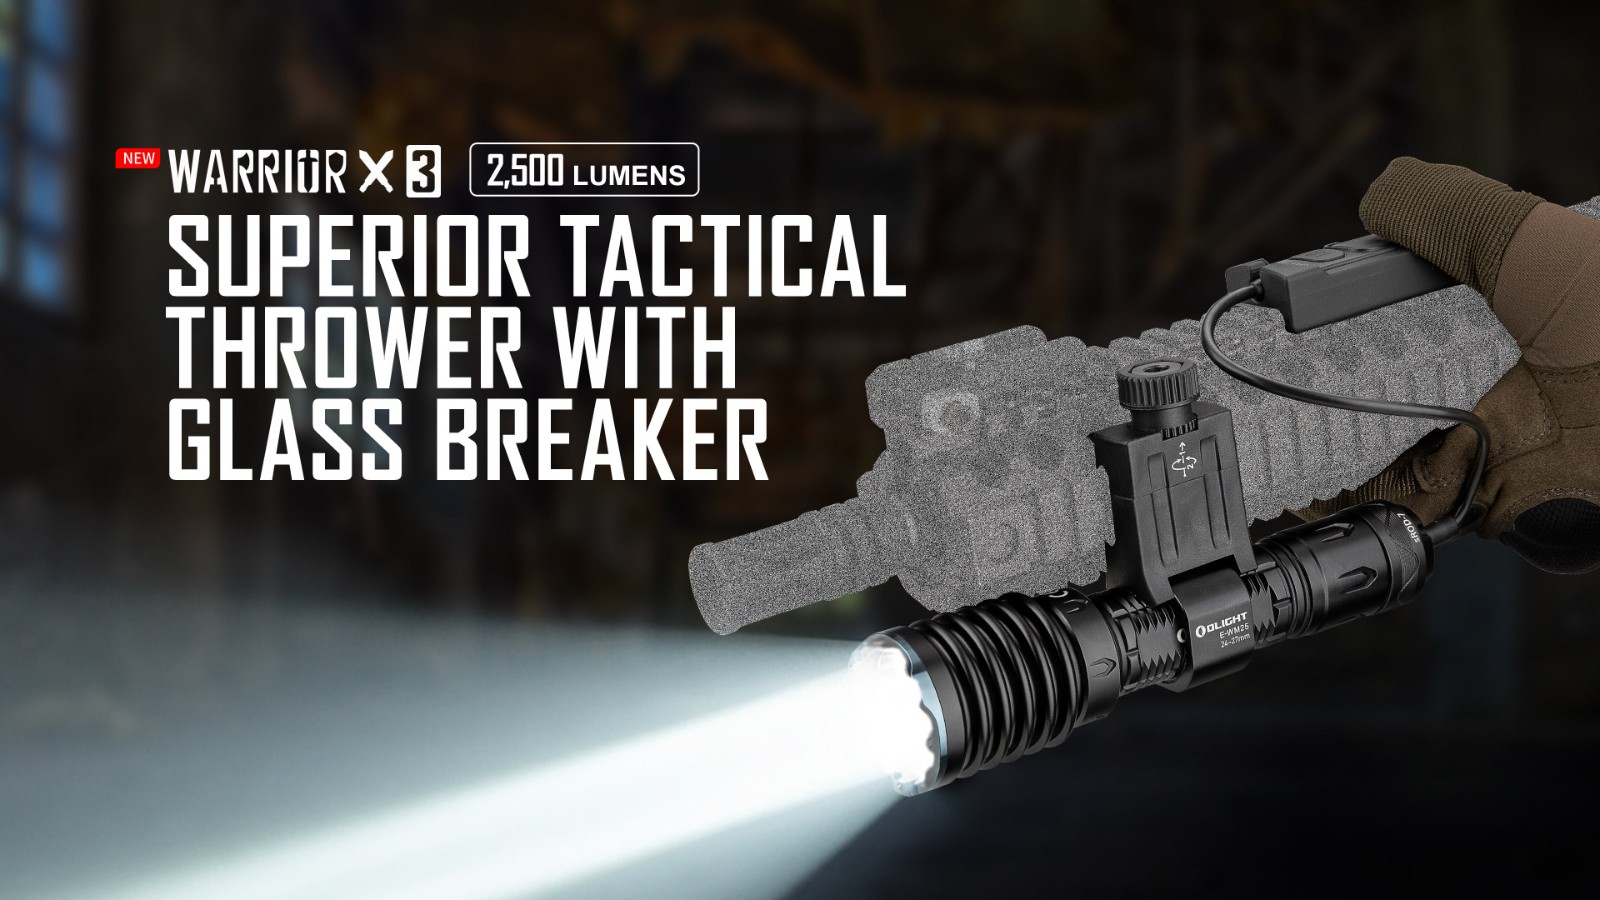 Superior tactical thrower with glass breaker